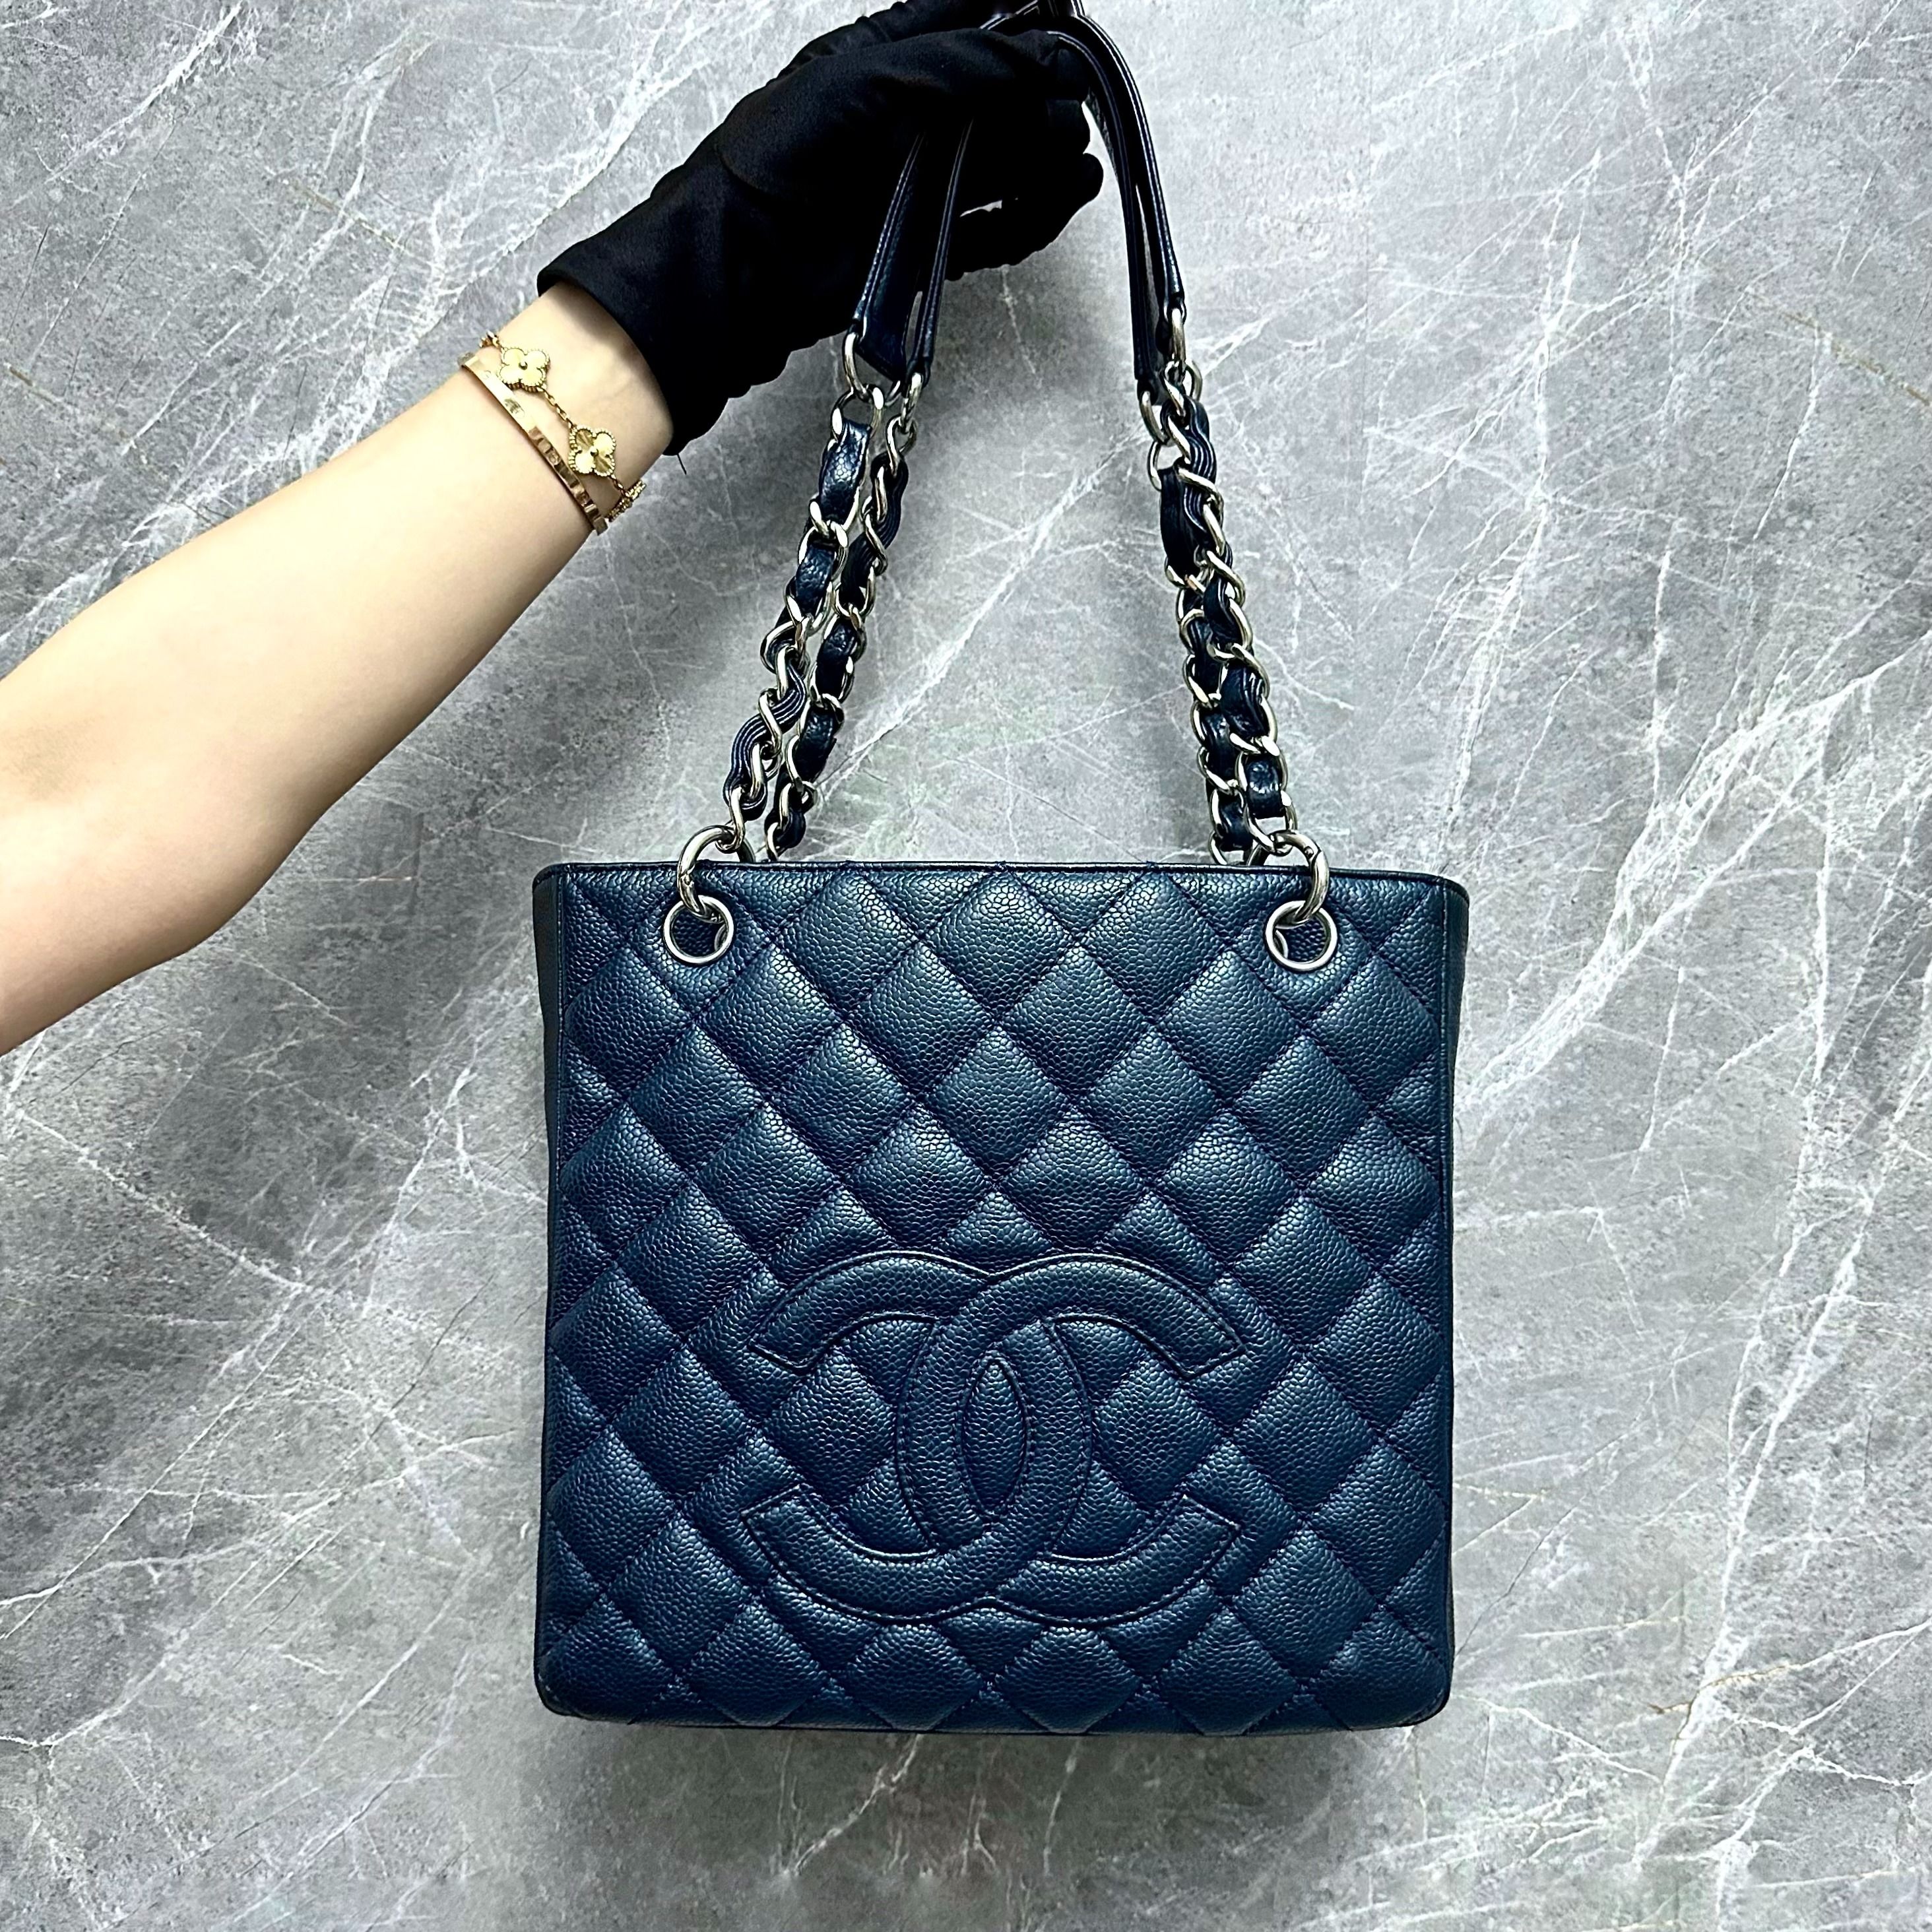 Petite shopping tote leather handbag Chanel Navy in Leather - 16419680